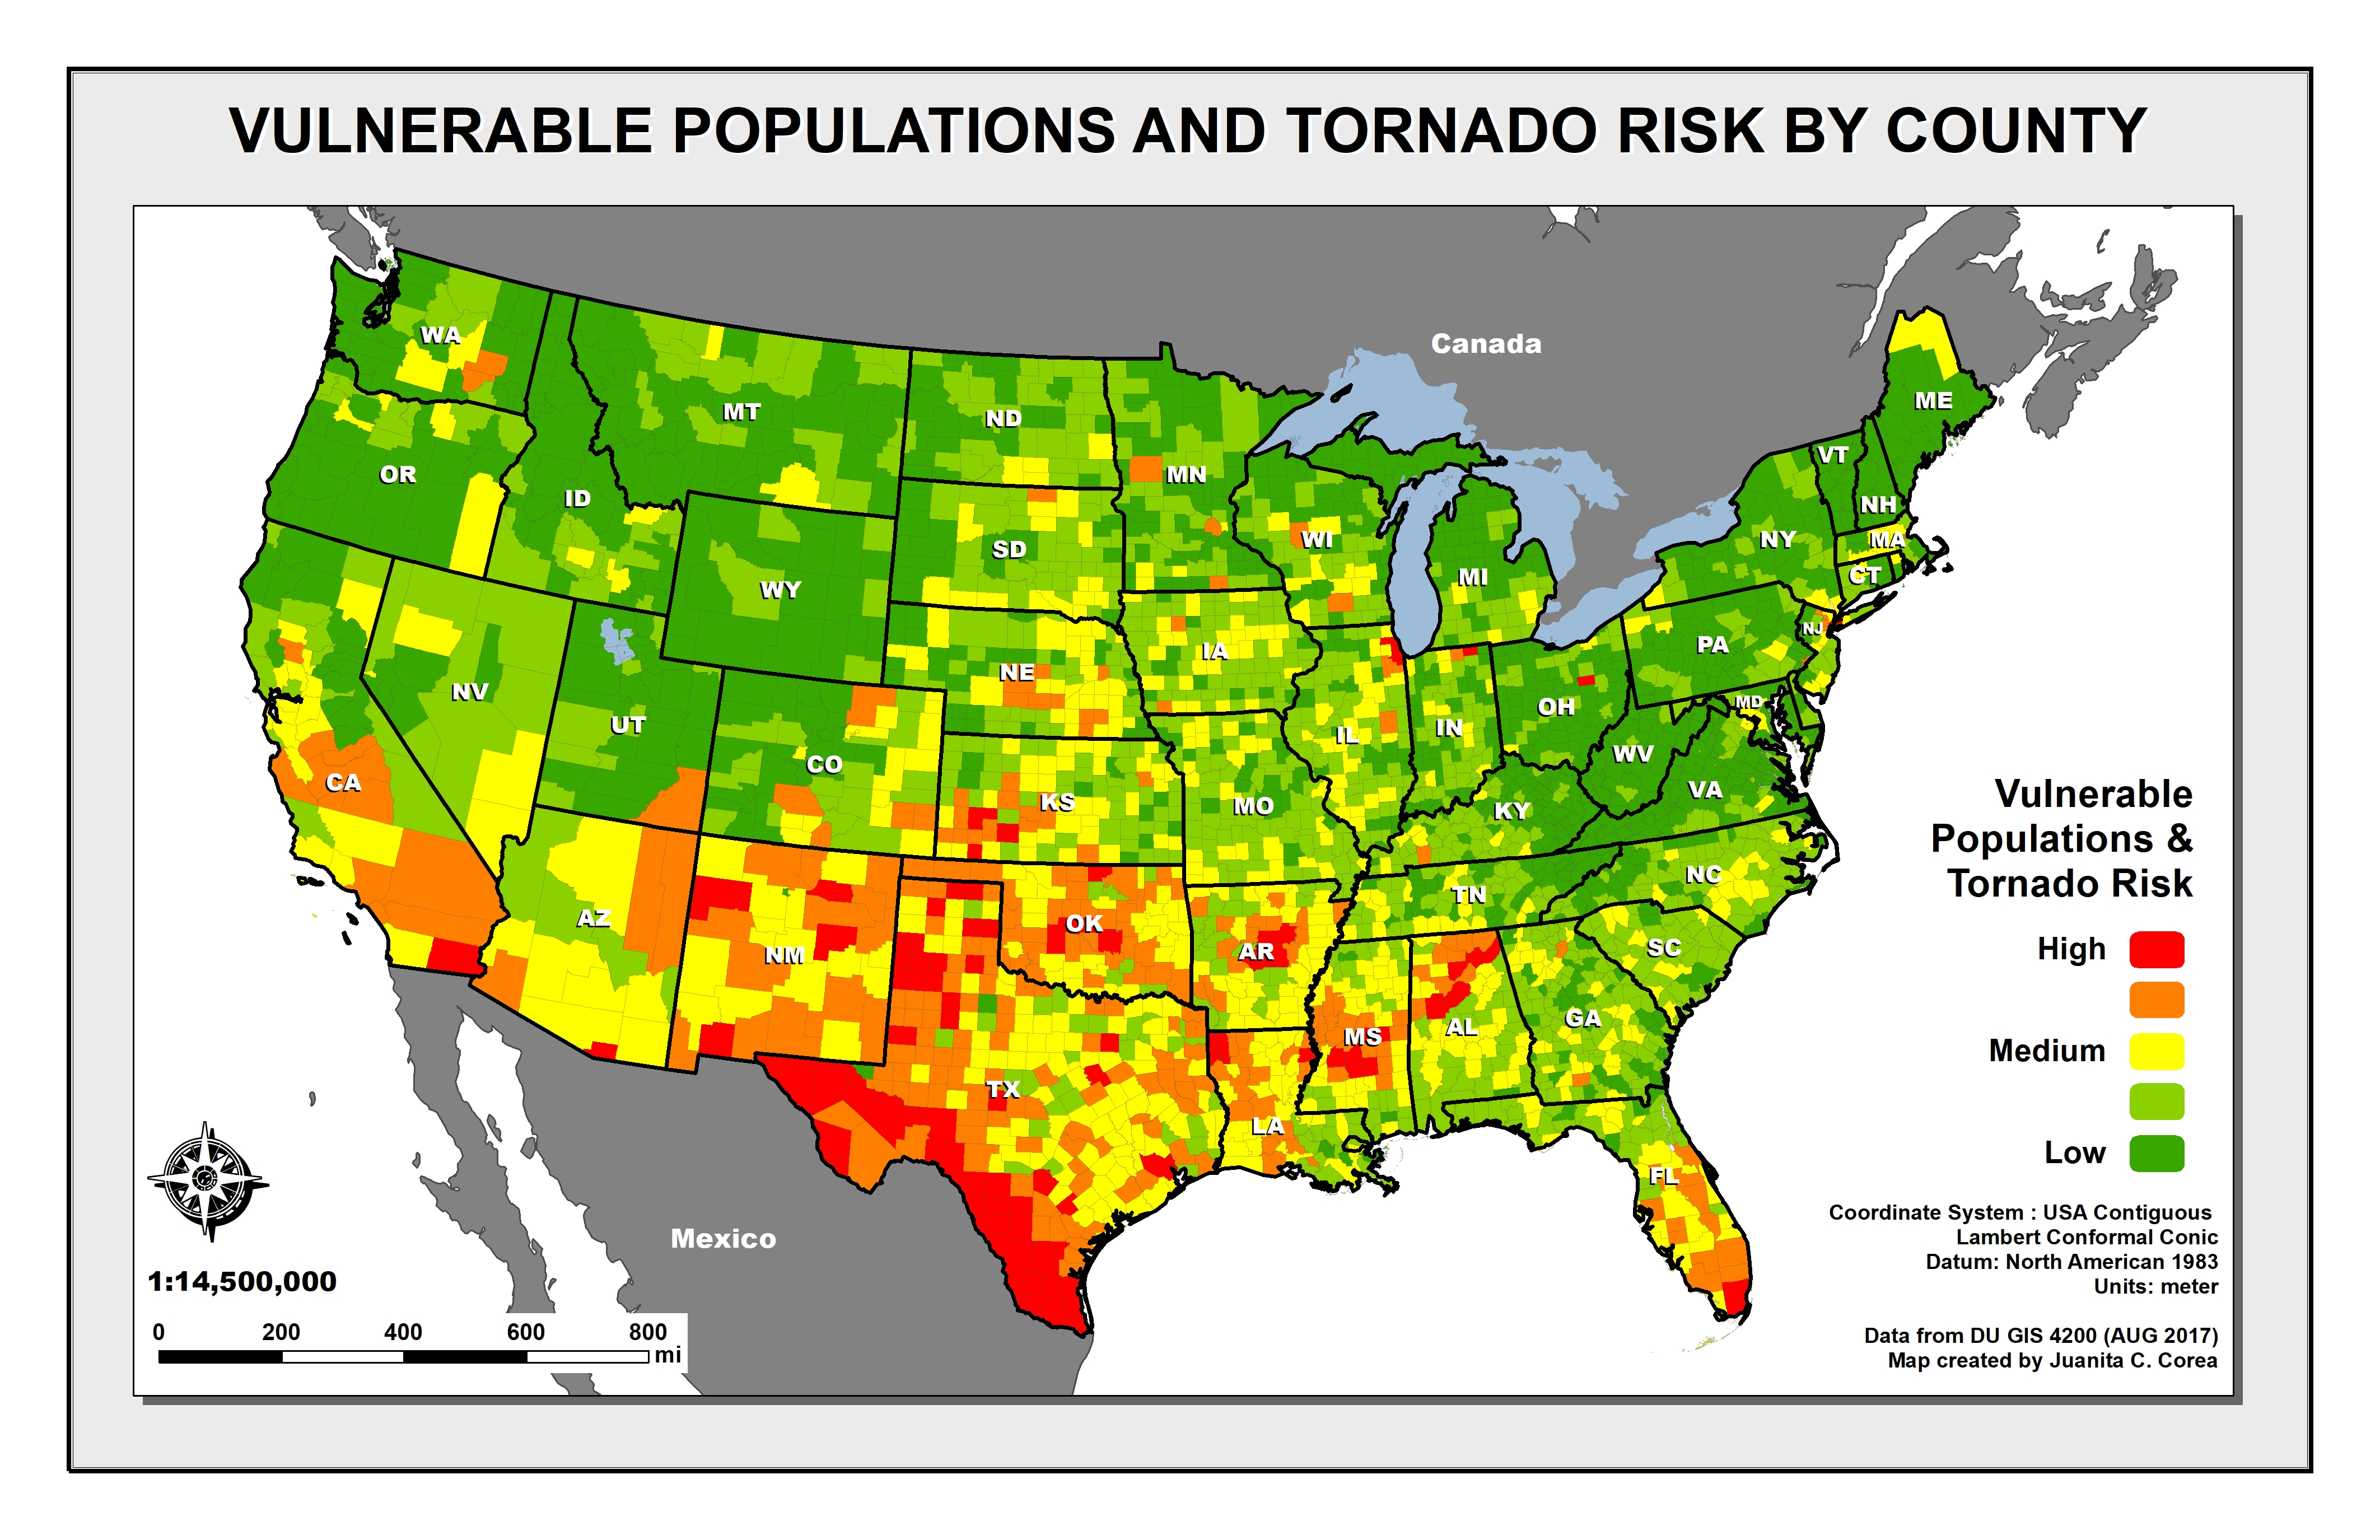 USA Vulnerable Populations and Tornado Risk by County